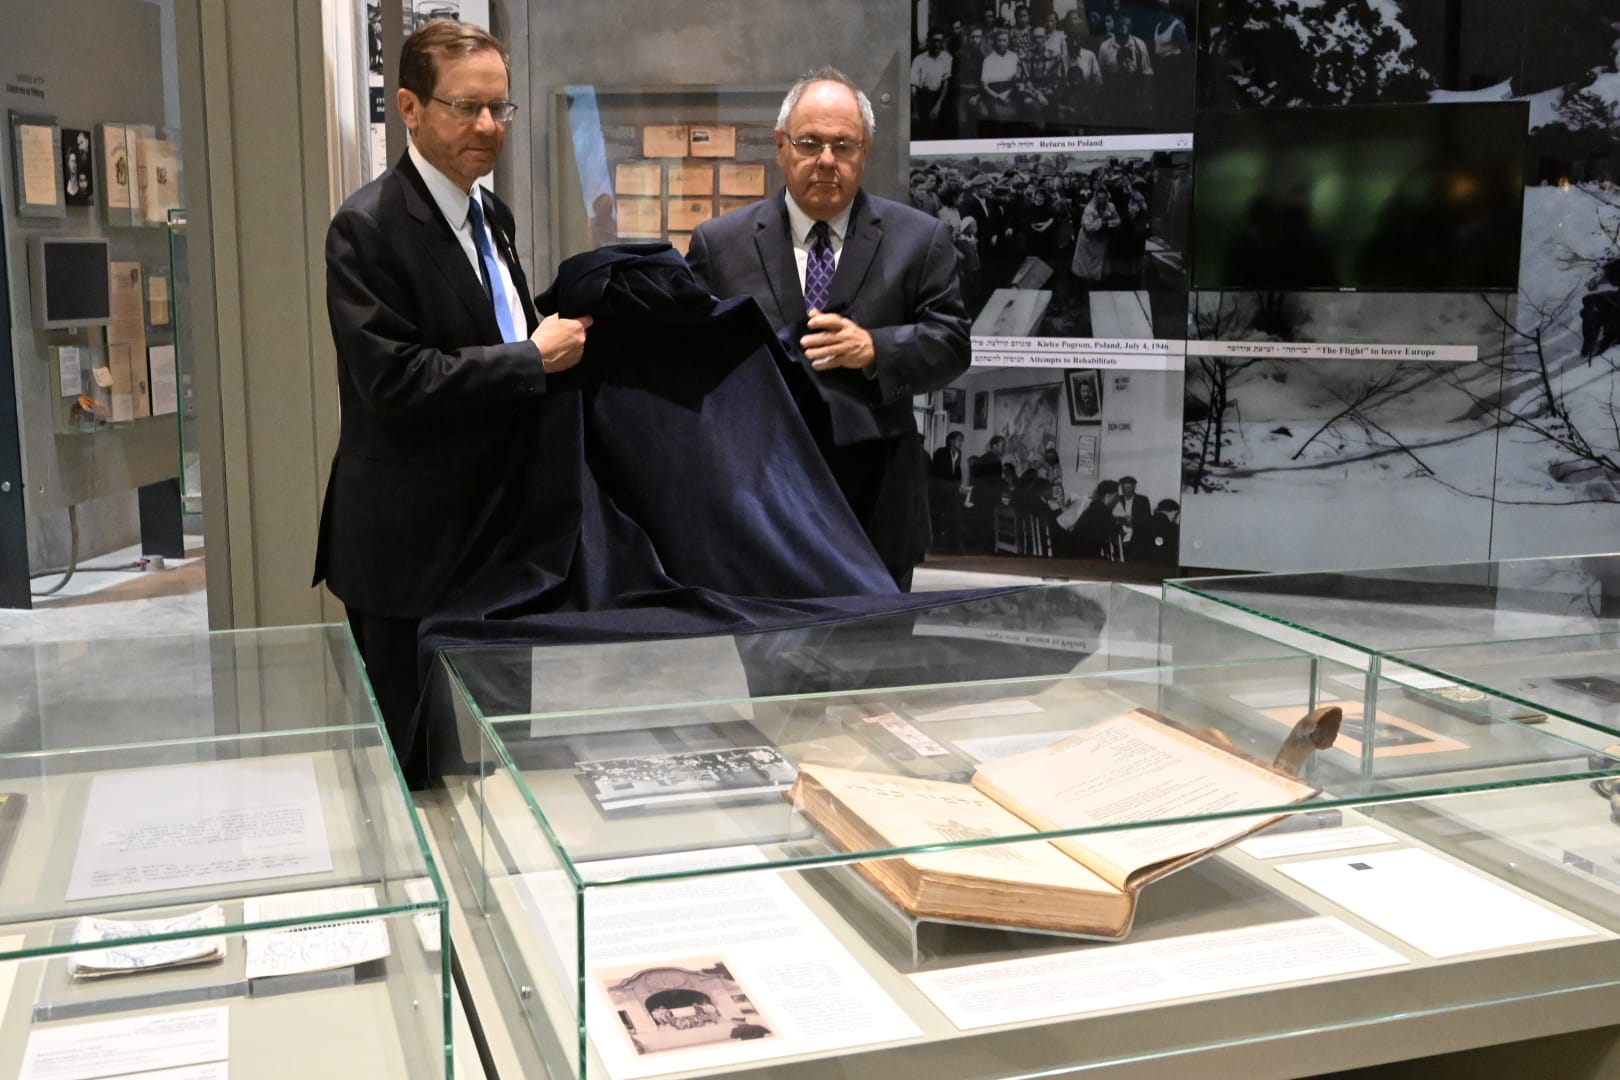 Herzog gives Talmud volume that survived the Holocaust to Yad Vashem